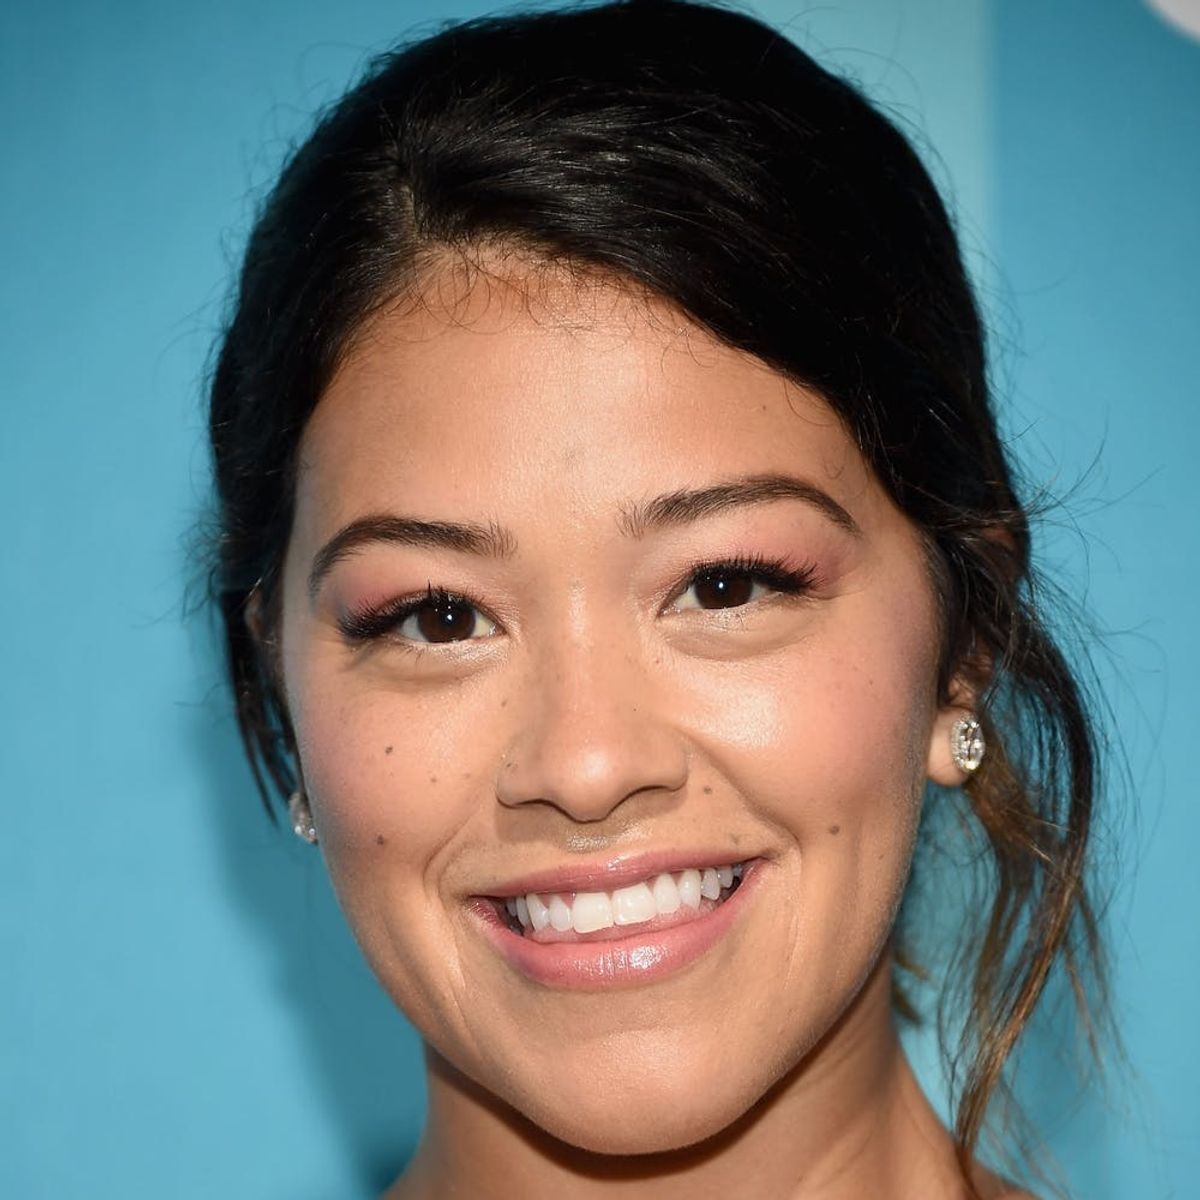 Gina Rodriguez Has 2 New TV Shows in the Works About Immigration